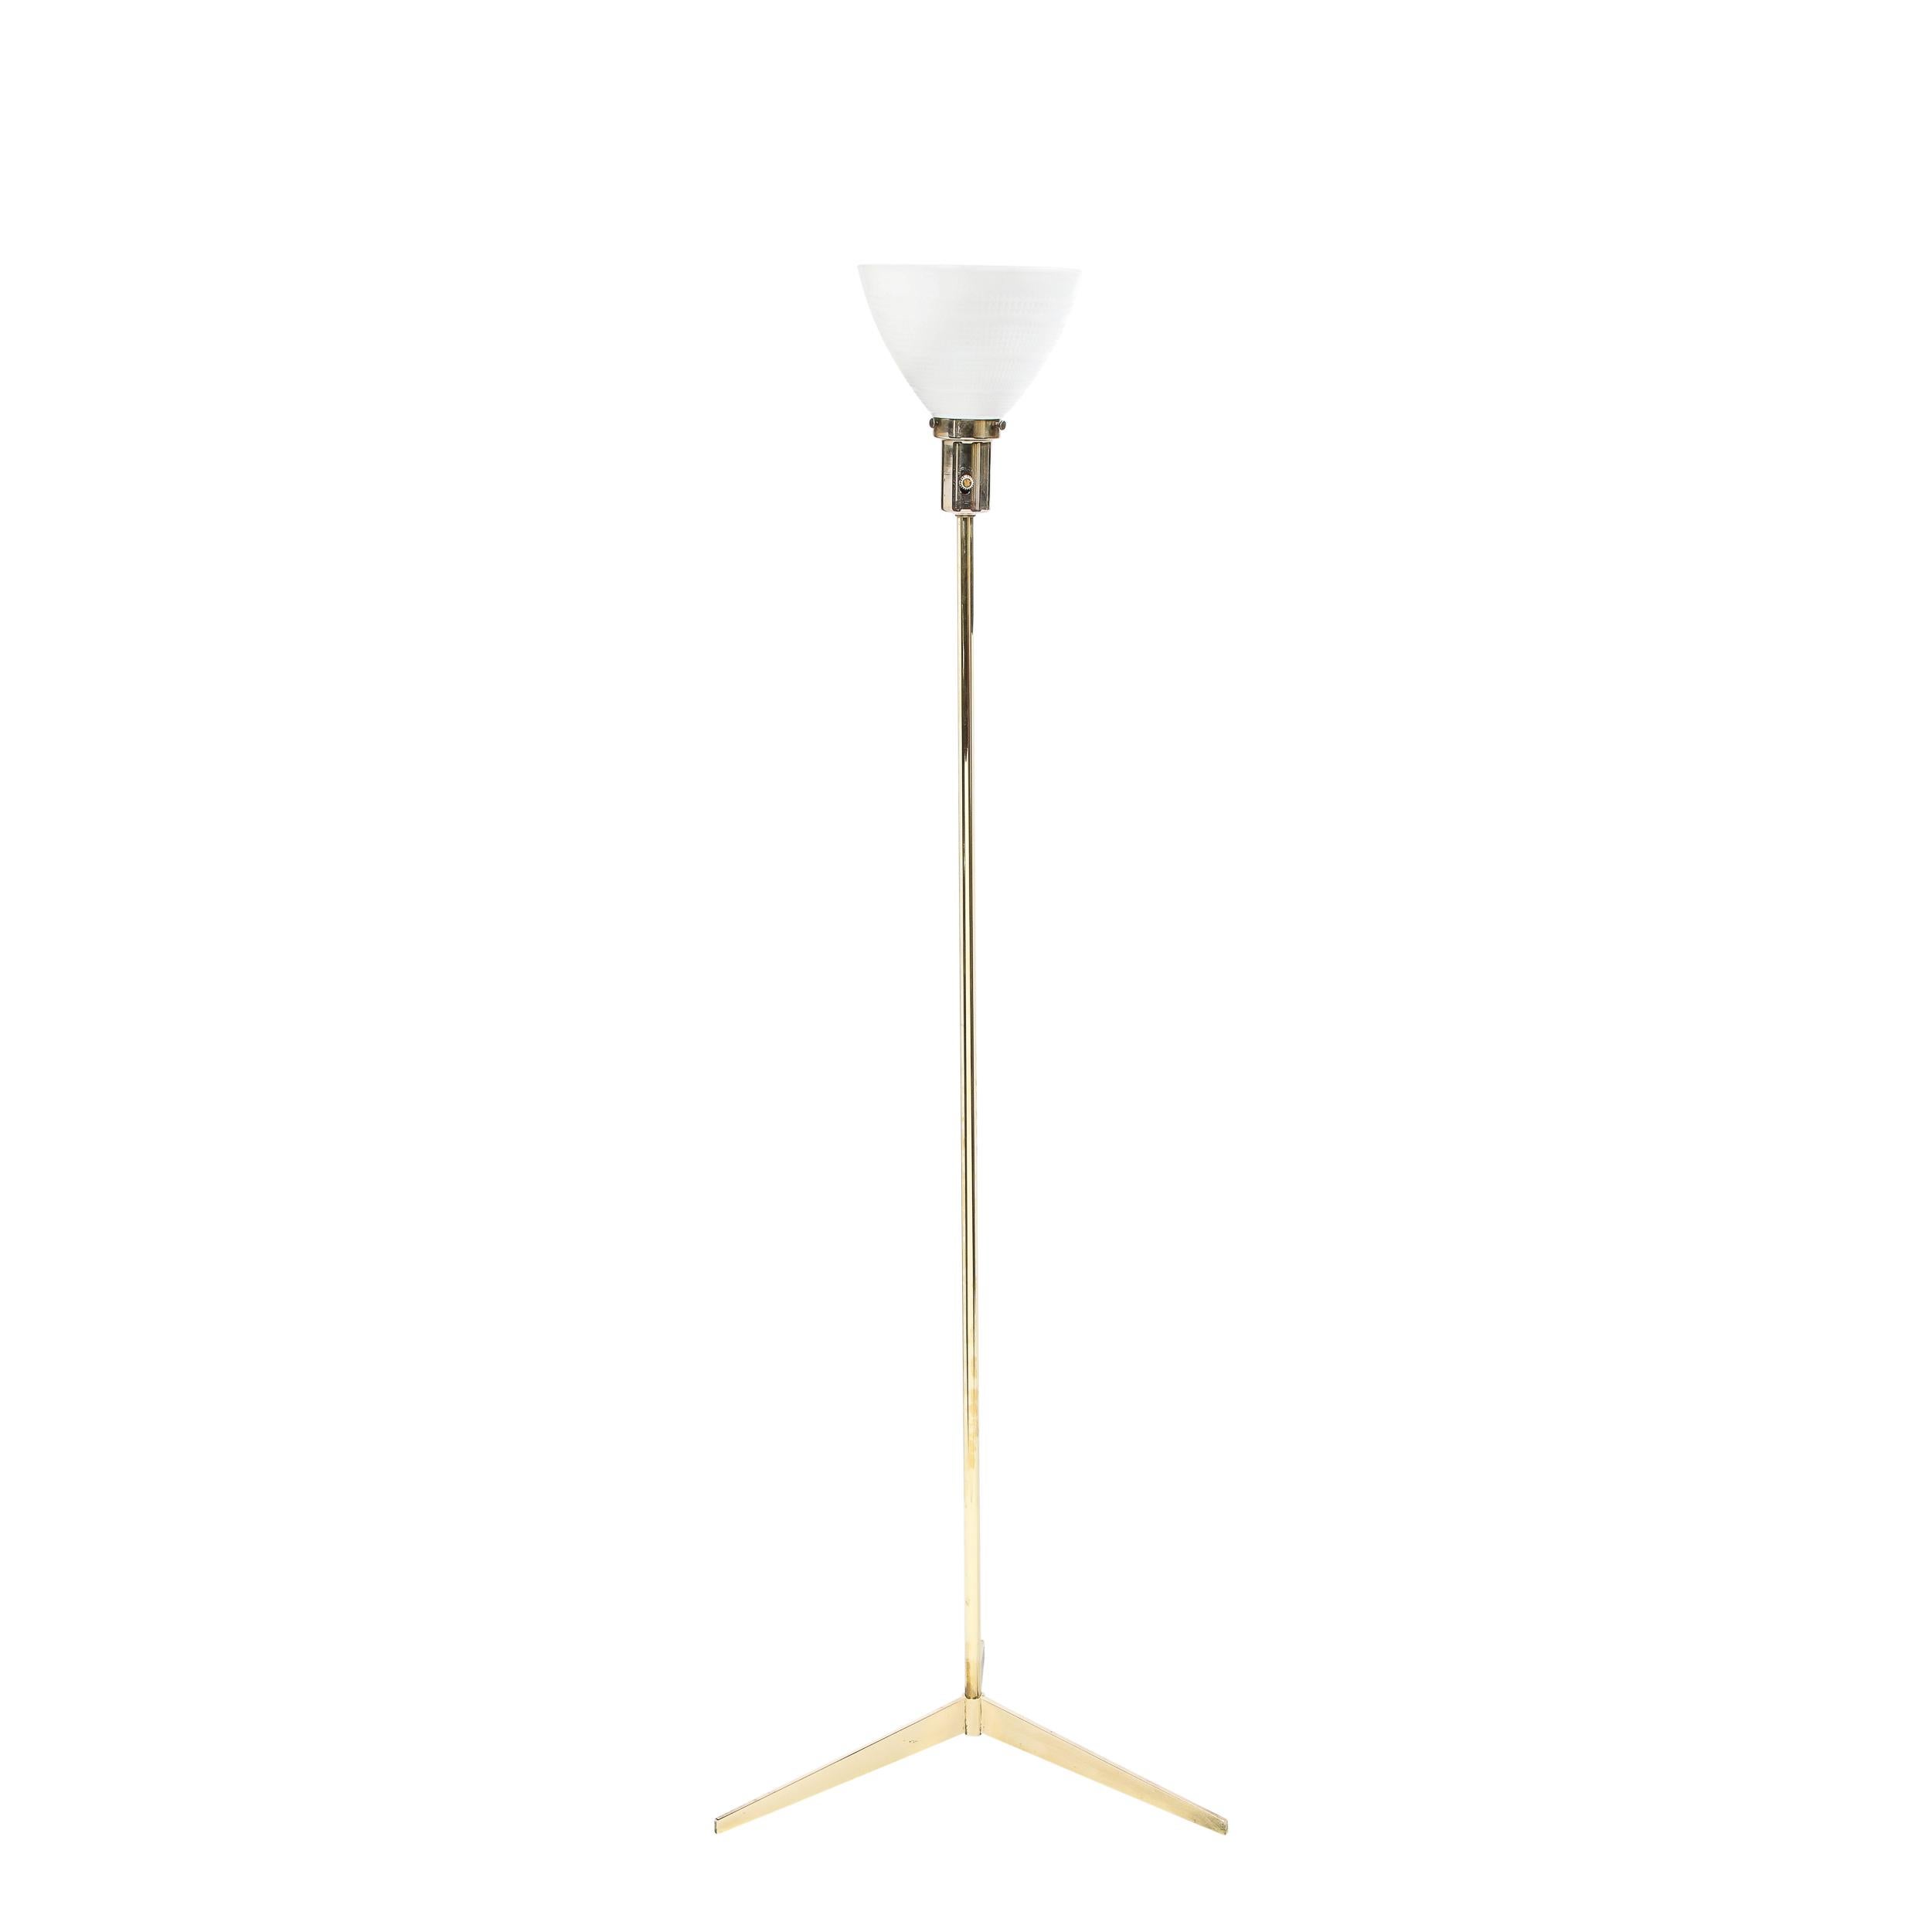 This elegant Mid-Century Modern floor lamp was designed by Paul McCobb in the United States circa 1950. It features an atomic tripod base with a cylindrical body all in polished brass. The lamp culminates in a domed textured white glass shade. This